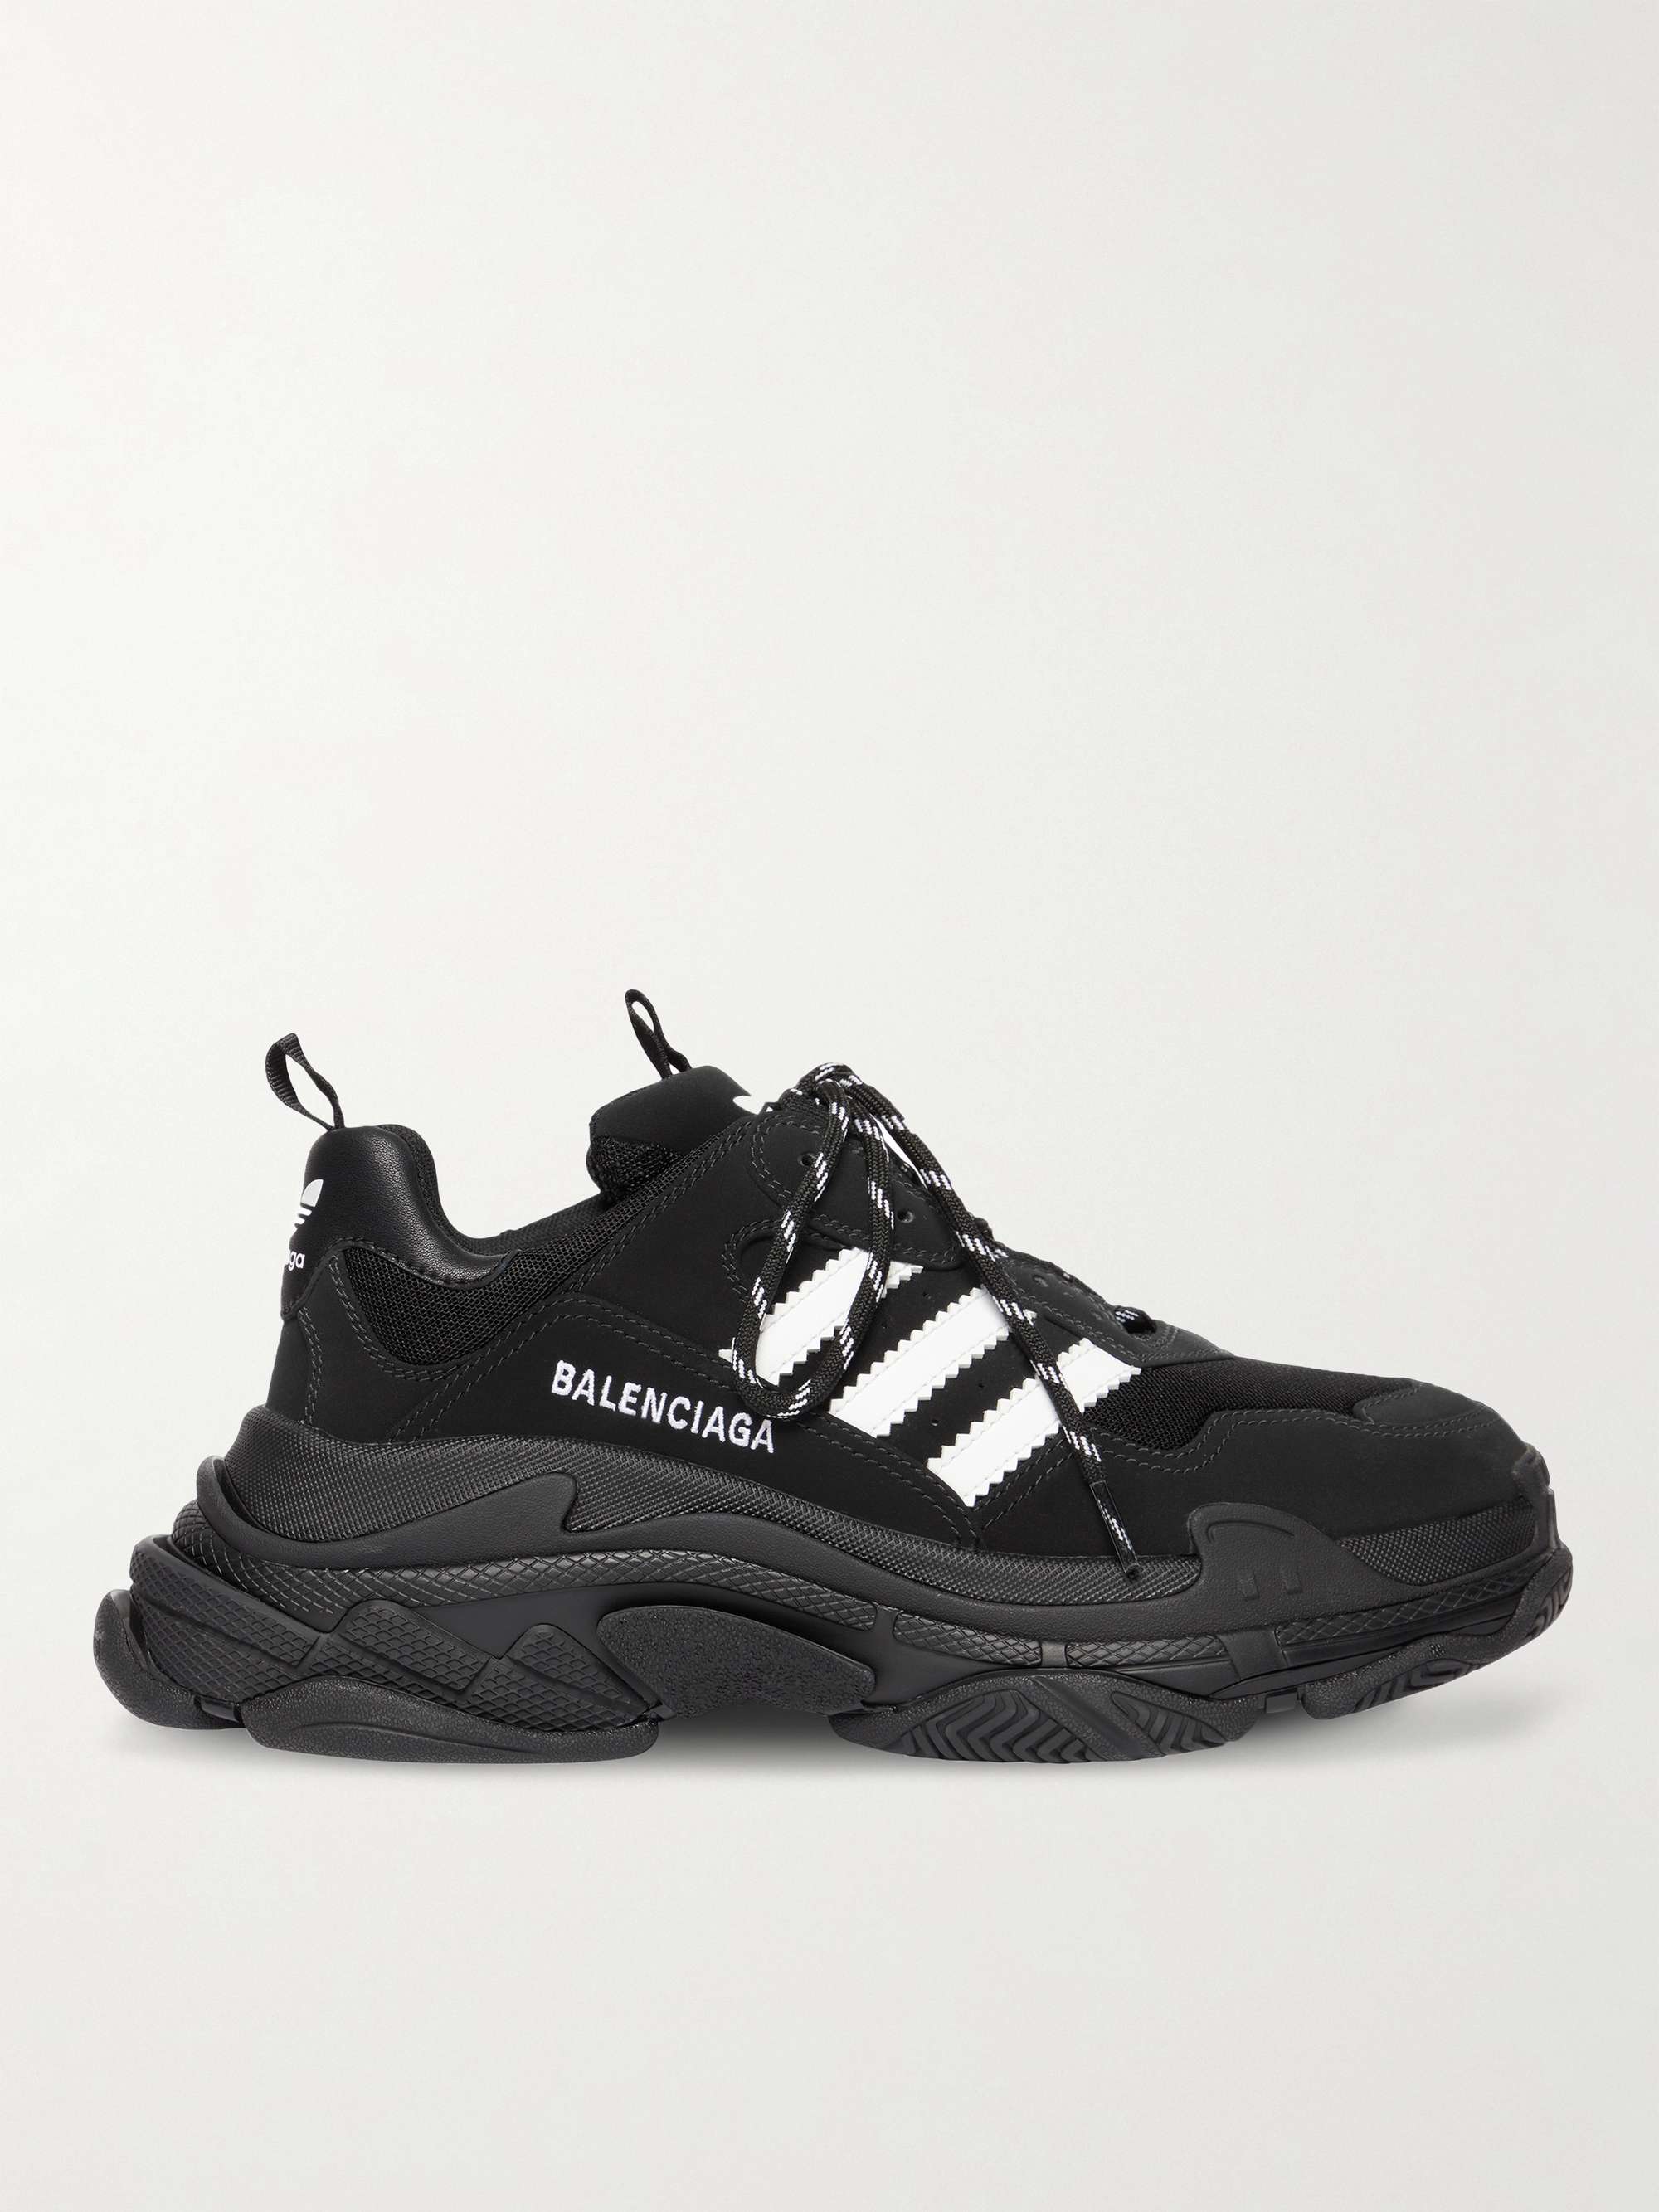 Black + adidas Triple S Leather-Trimmed Nubuck and Mesh Sneakers |  BALENCIAGA | MR PORTER